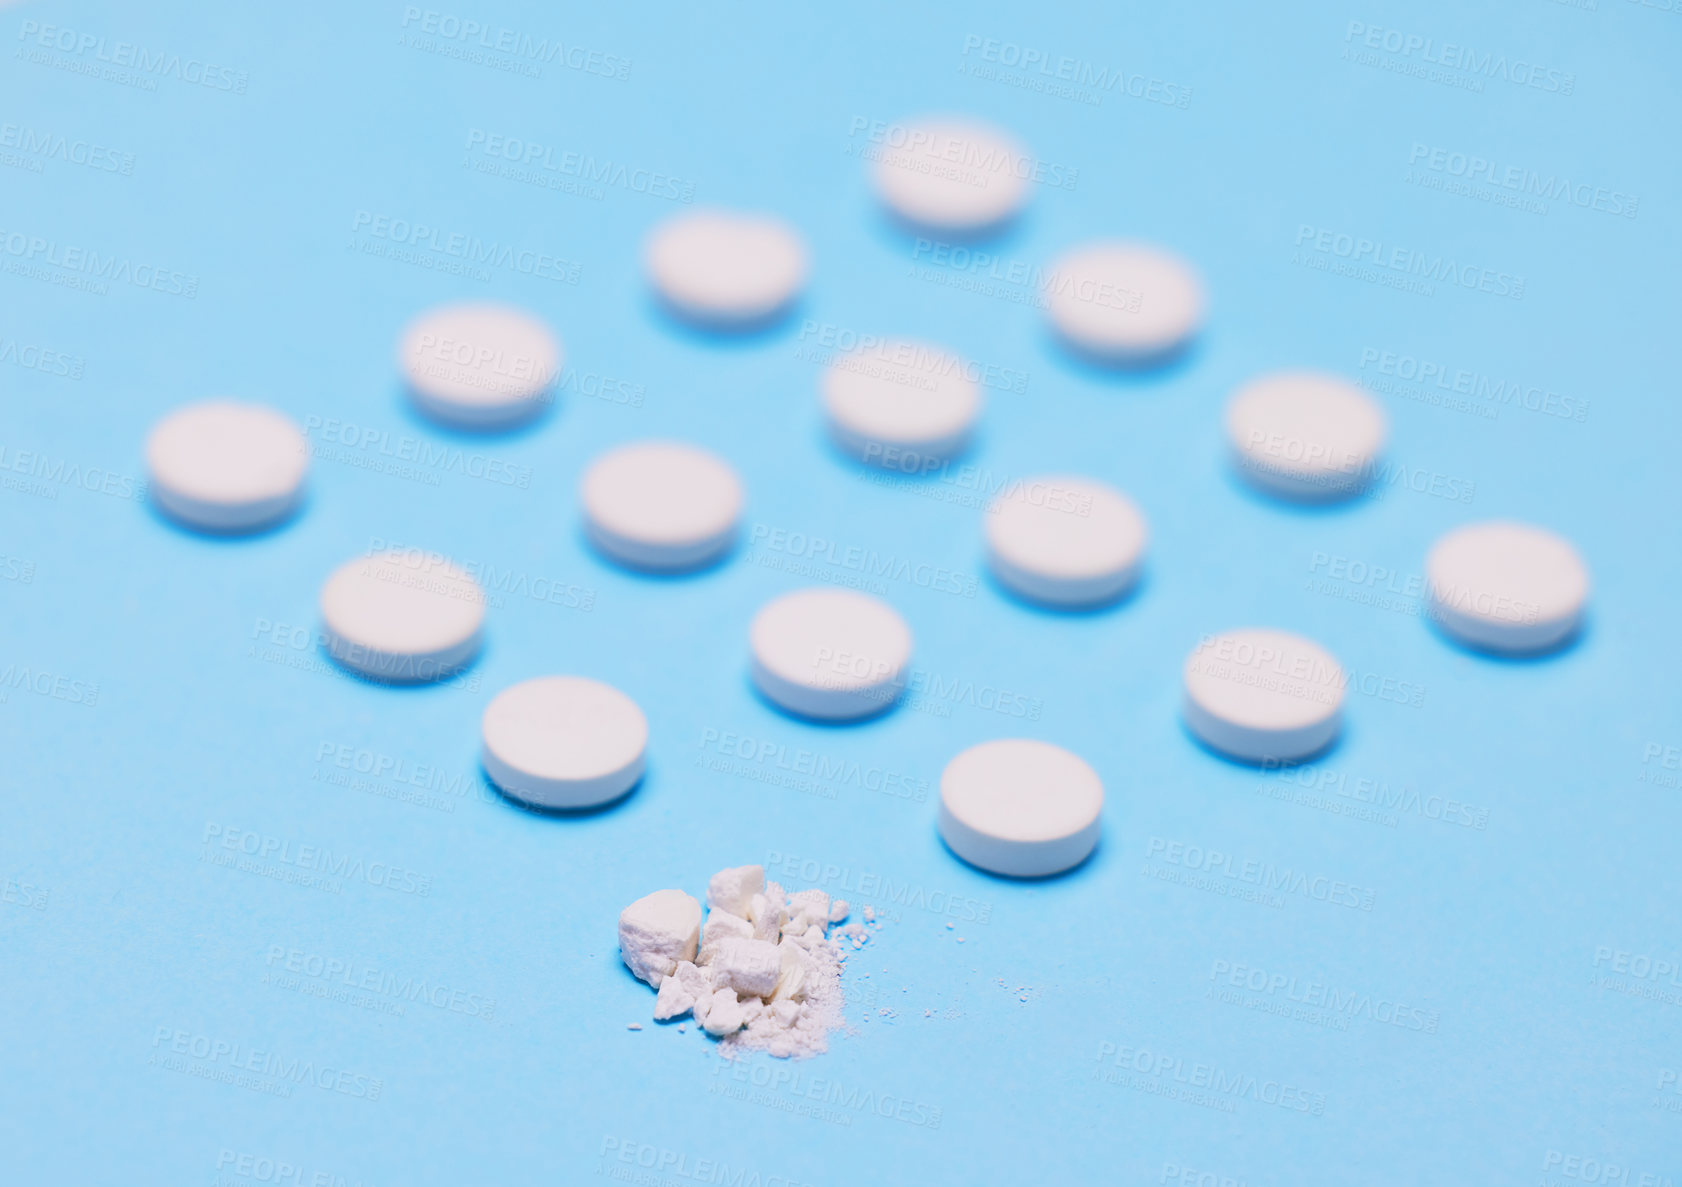 Buy stock photo Studio shot of pills against a blue background